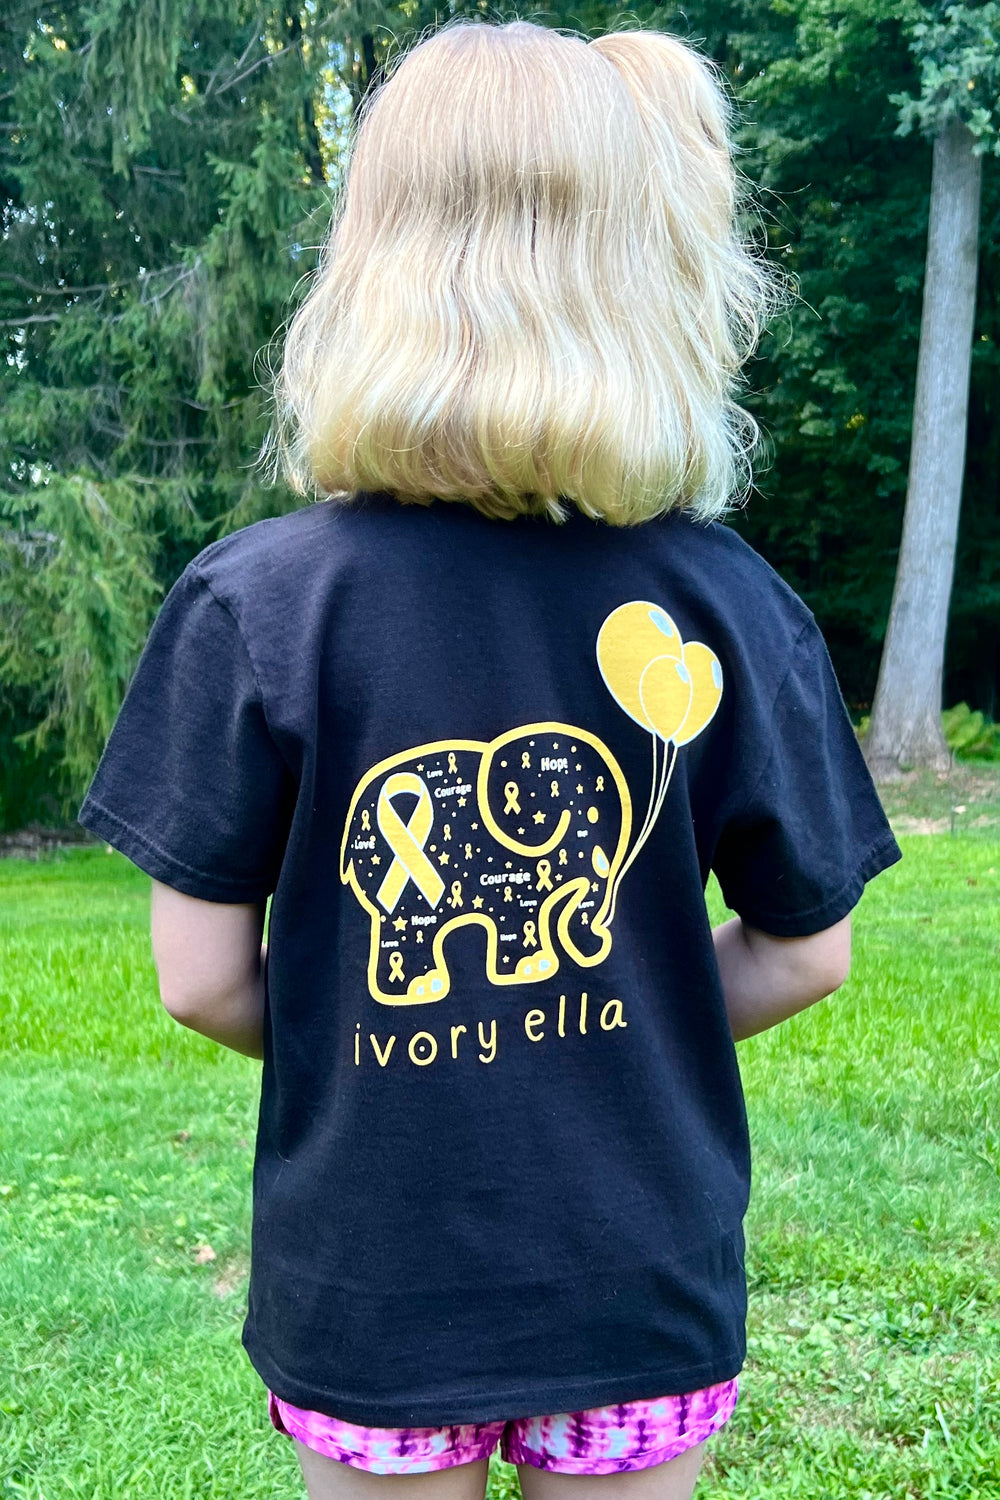 Childhood Cancer Youth T-Shirt